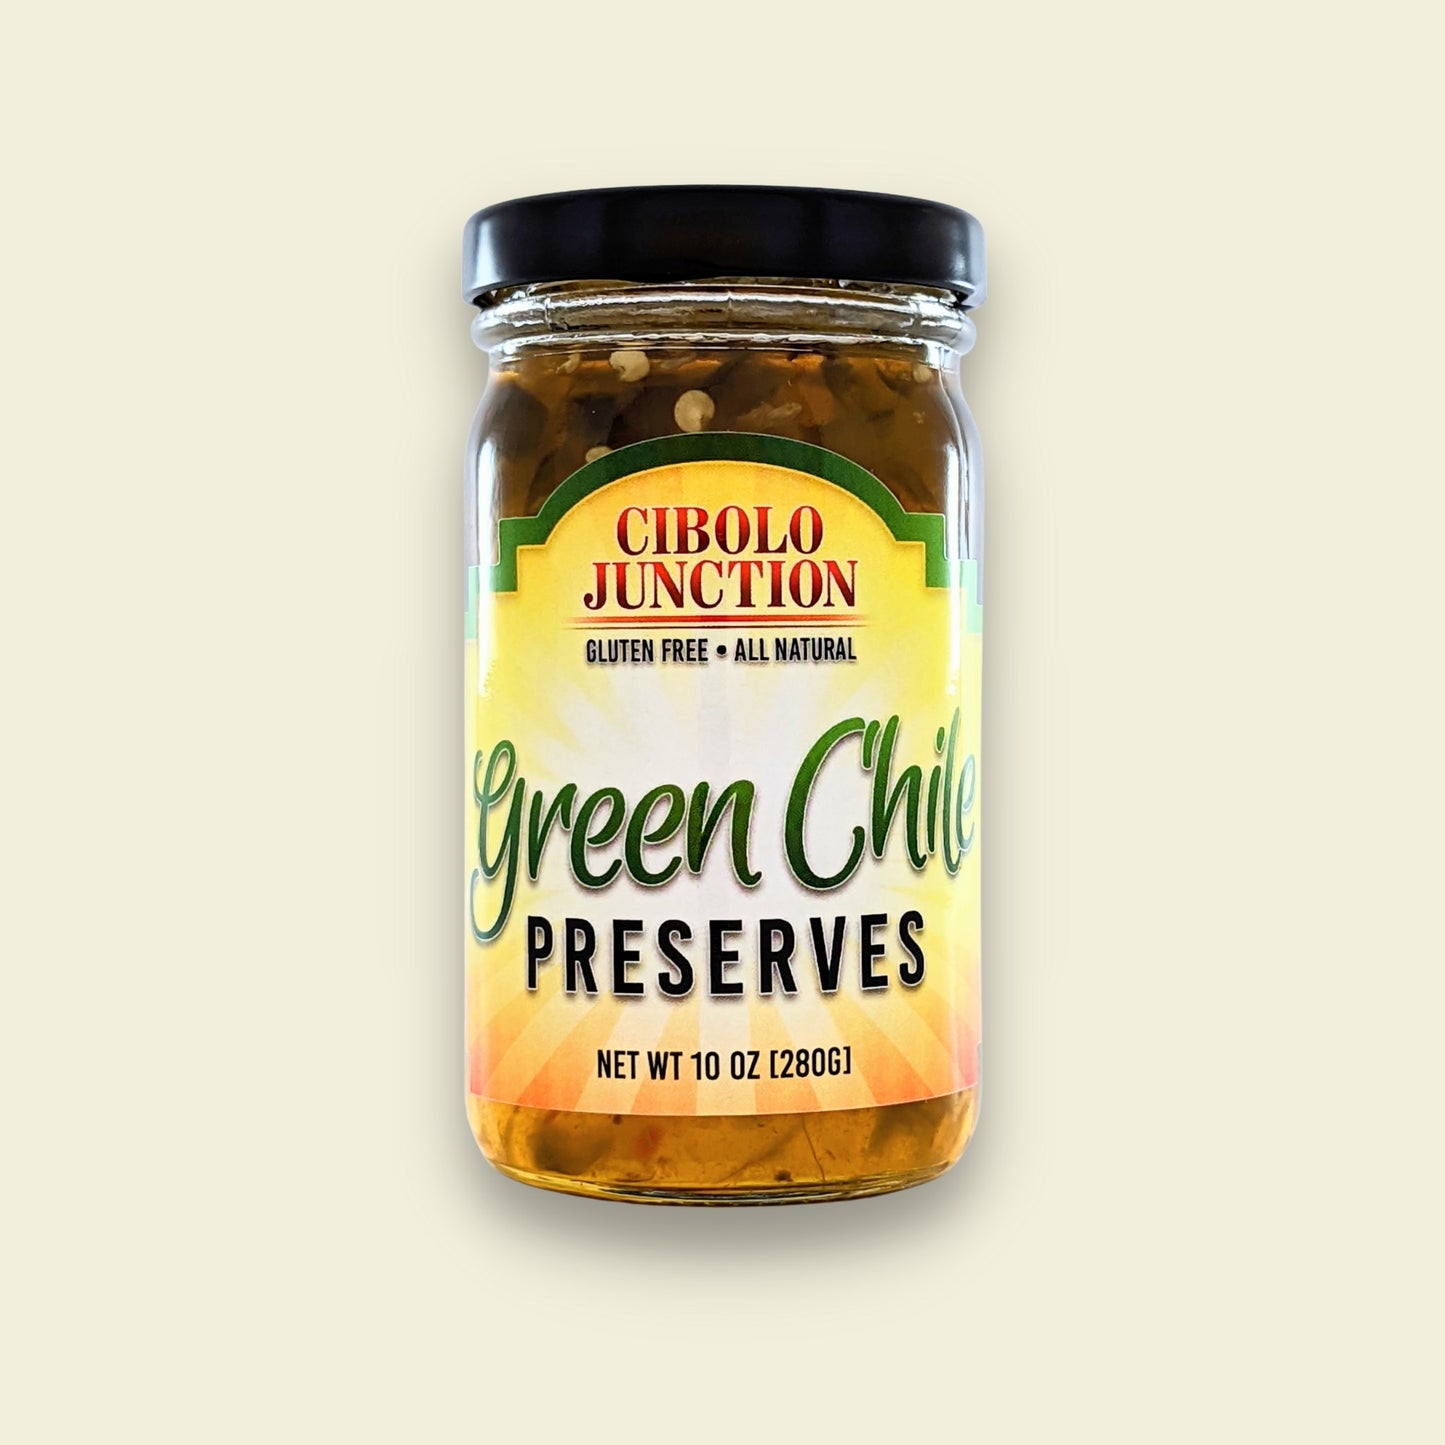 Hatch Green Chile Preserves